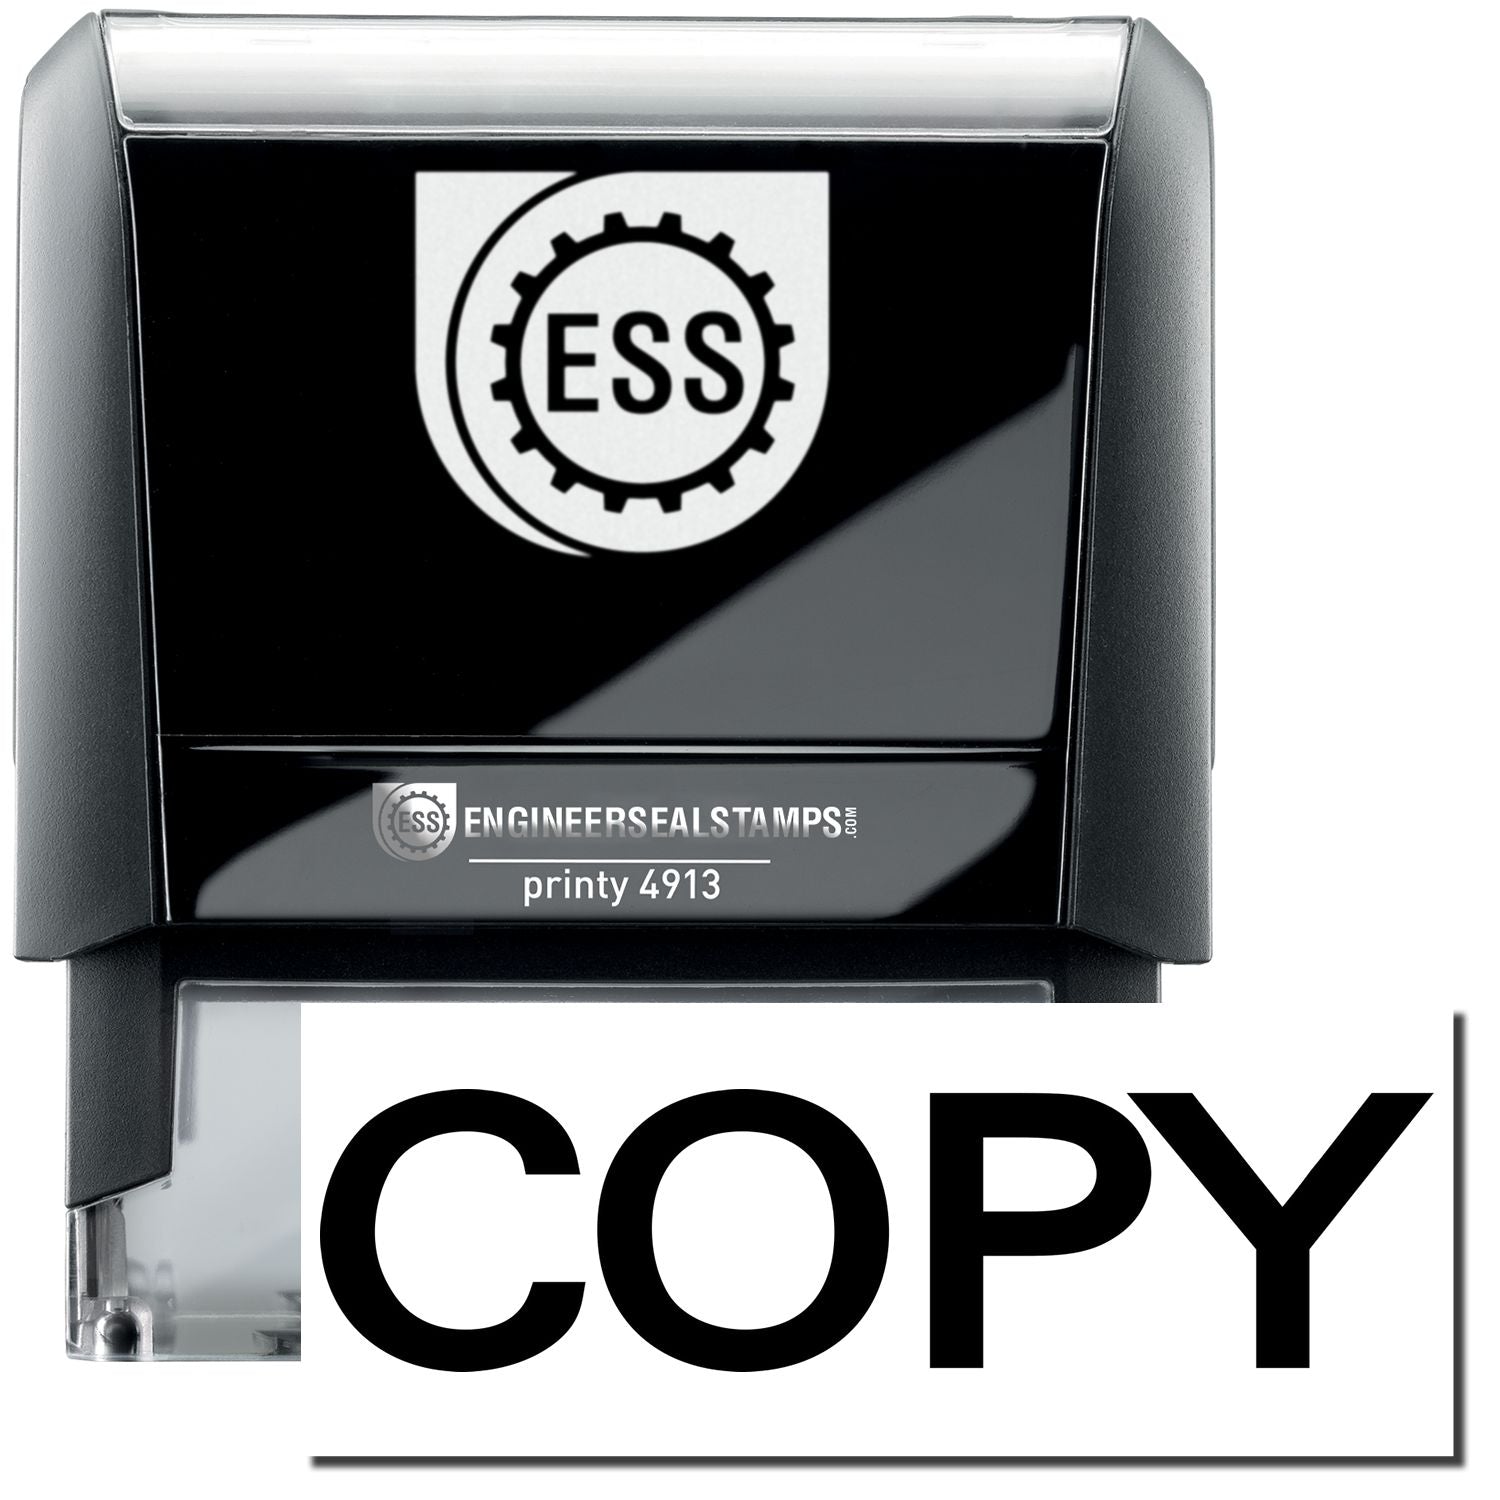 A self-inking stamp with a stamped image showing how the text "COPY" in a large bold font is displayed by it after stamping.